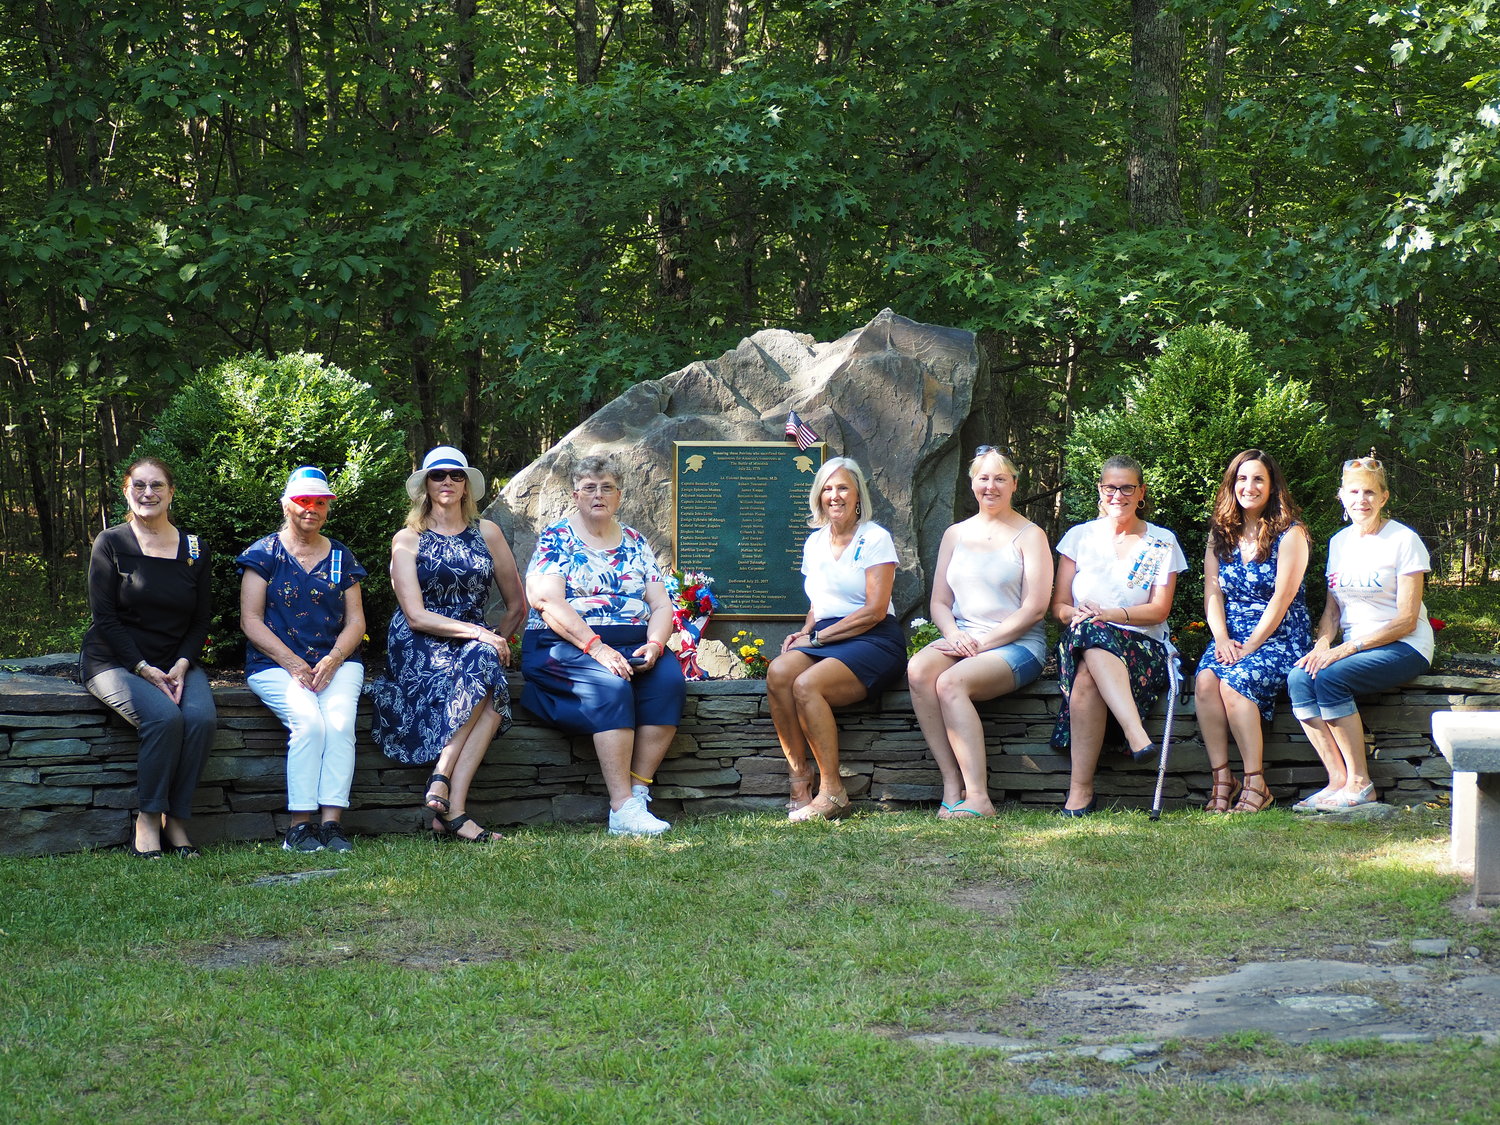 At the Minisink battlefield near Barryville in July, the National Society of Daughters of the American Revolution (NSDAR) members gathered together, following an honored tradition, to lay flowers at the soldiers’ monument in conjunction with the commemoration ceremony that was held this year. Left to right, Lynn Priebe of the Beaverkill Chapter; Secretary Mary Iulo and Treasurer Doreen Bensen of the Wayne Chapter; Helen Hoering and Regent Bambi Meadow, of the Beaverkill Chapter; Jennifer Calabria, Regent Krista Brink, Vice Regent Rachel Innella, and Historian Lois Cronic of the Old Mine Road Chapter.